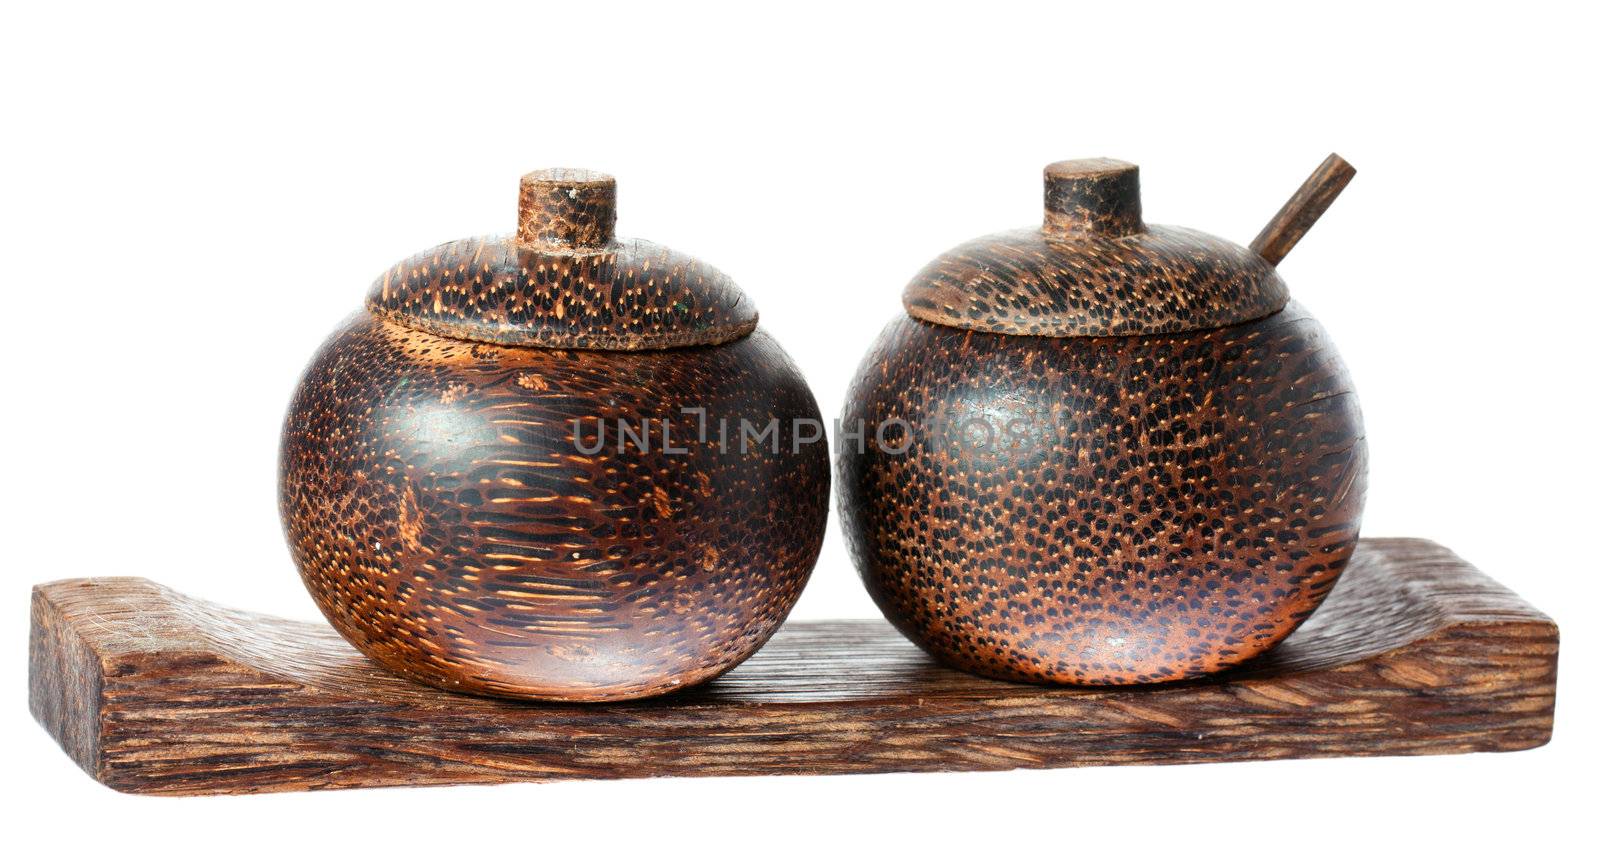 A pair of wooden old fasioned asian style salt and pepper bowls with lids and spoon. Isolated over white with clipping path.